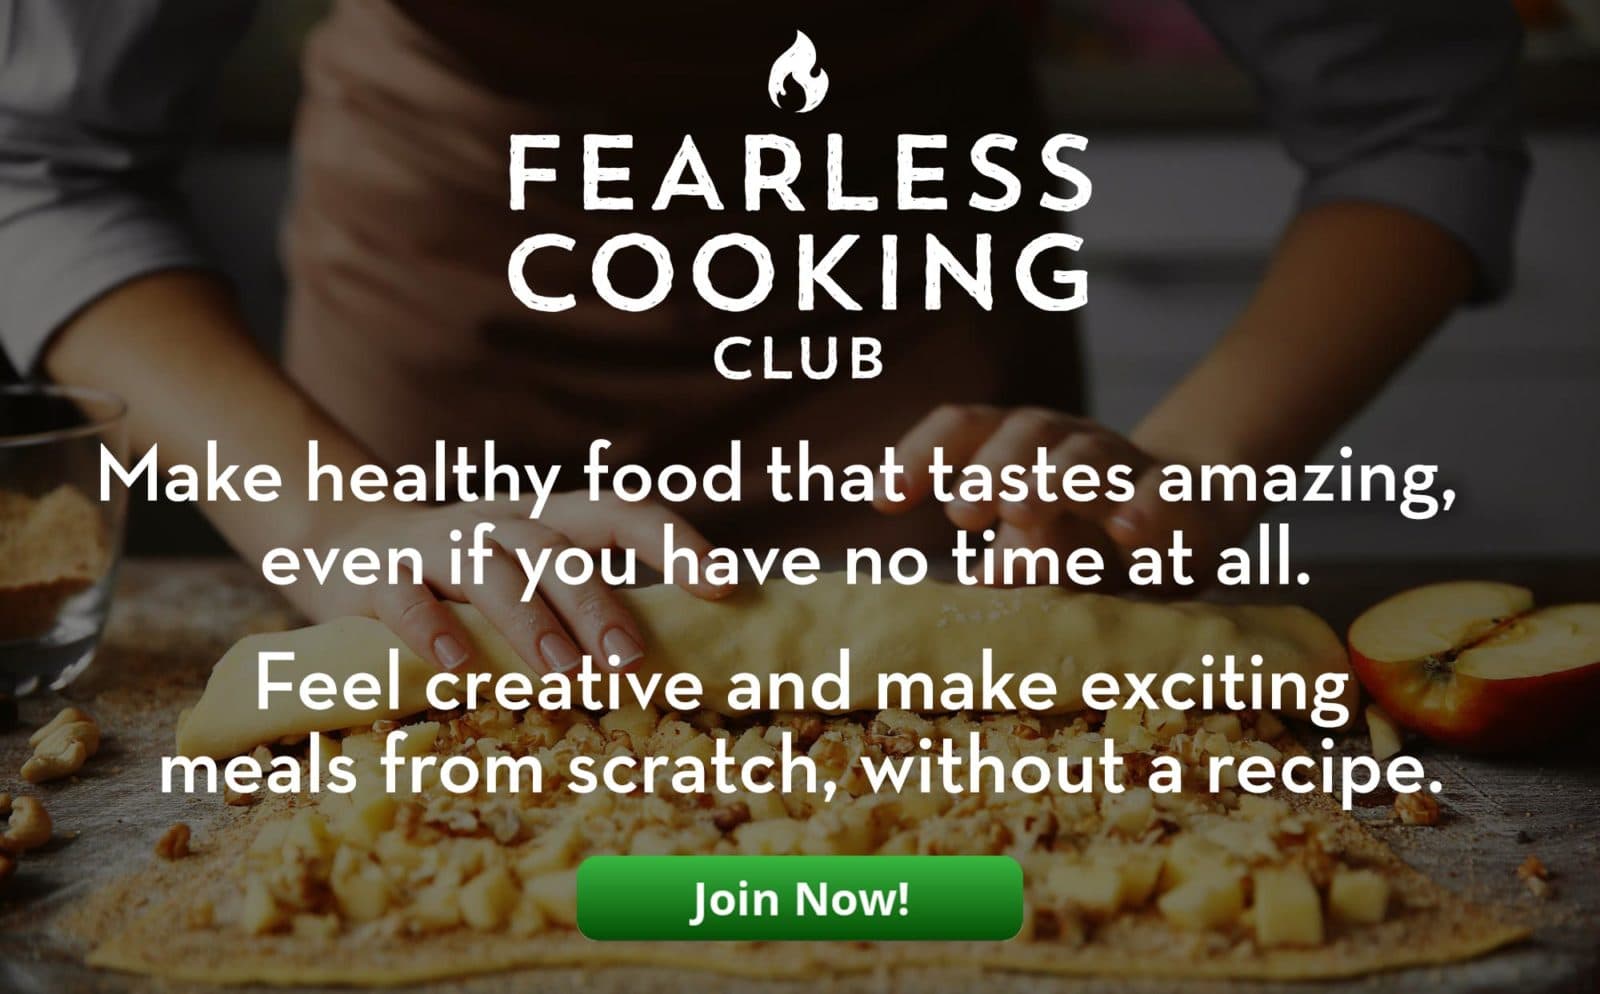 Fearless Cooking Club